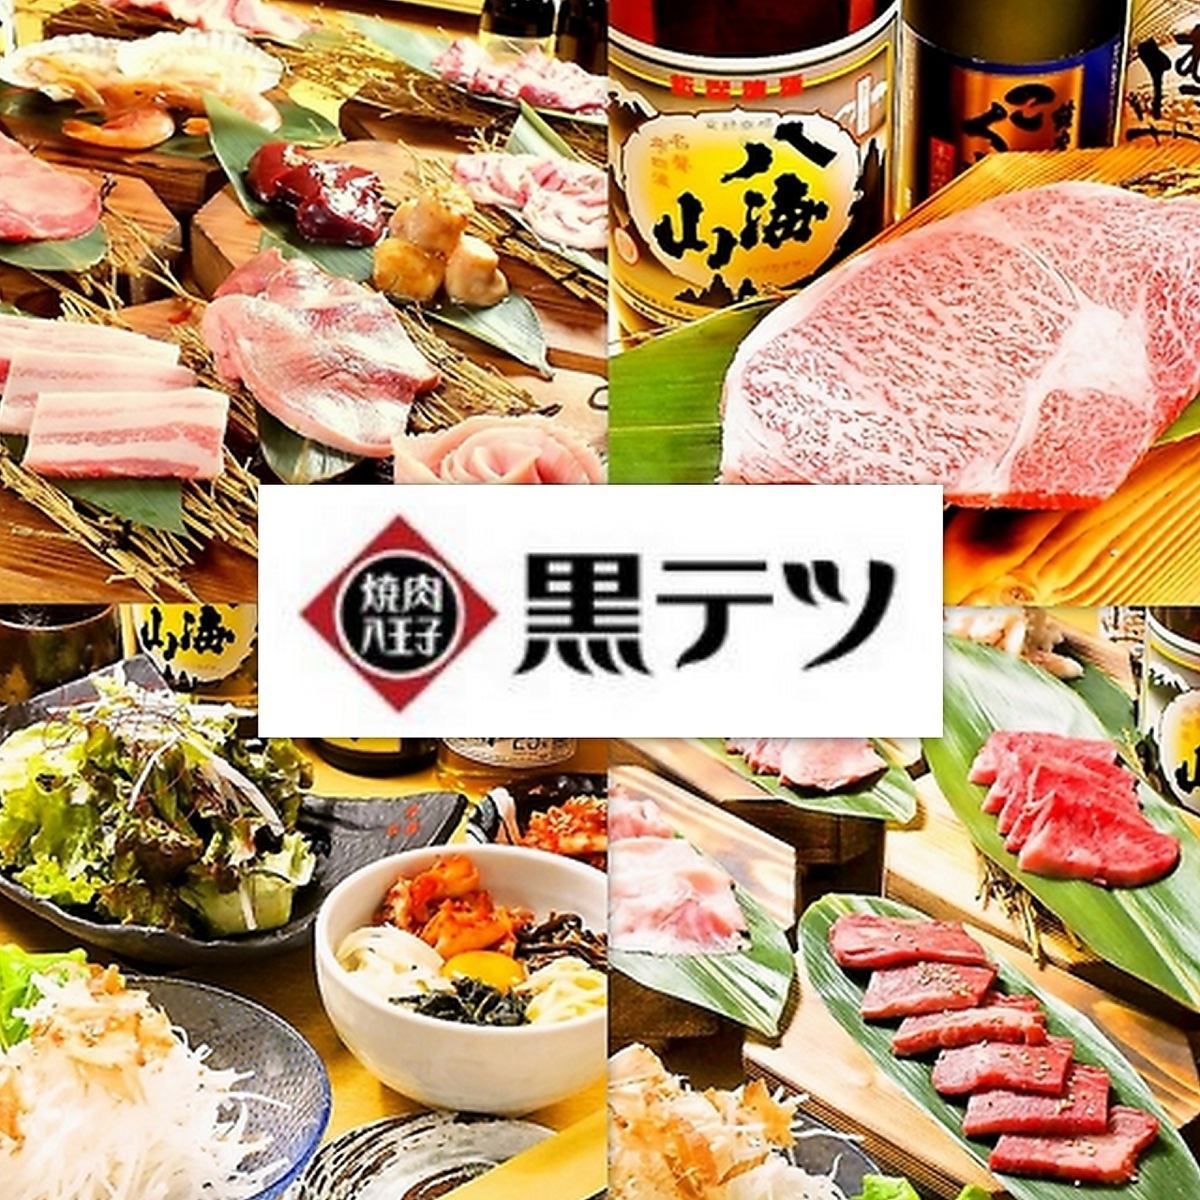 Perfect for parties, with beef tongue and drinks for 4,000 yen (tax included)